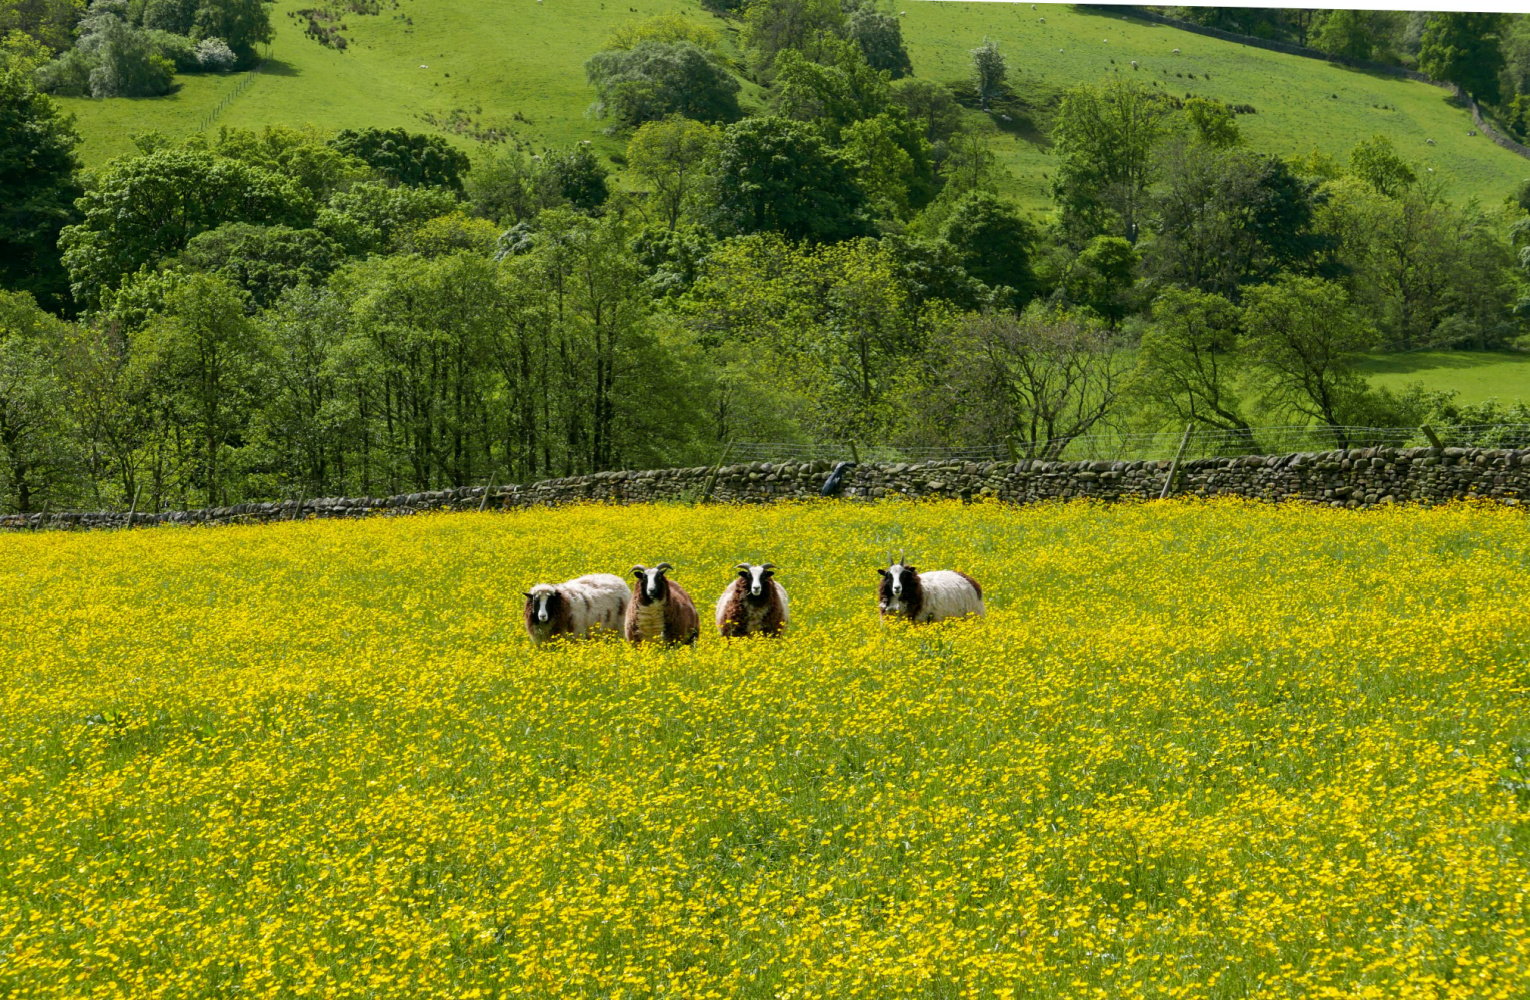 Image name jacob sheep coverdale buttercups yorkshire the 25 image from the post West Scrafton in Yorkshire.com.